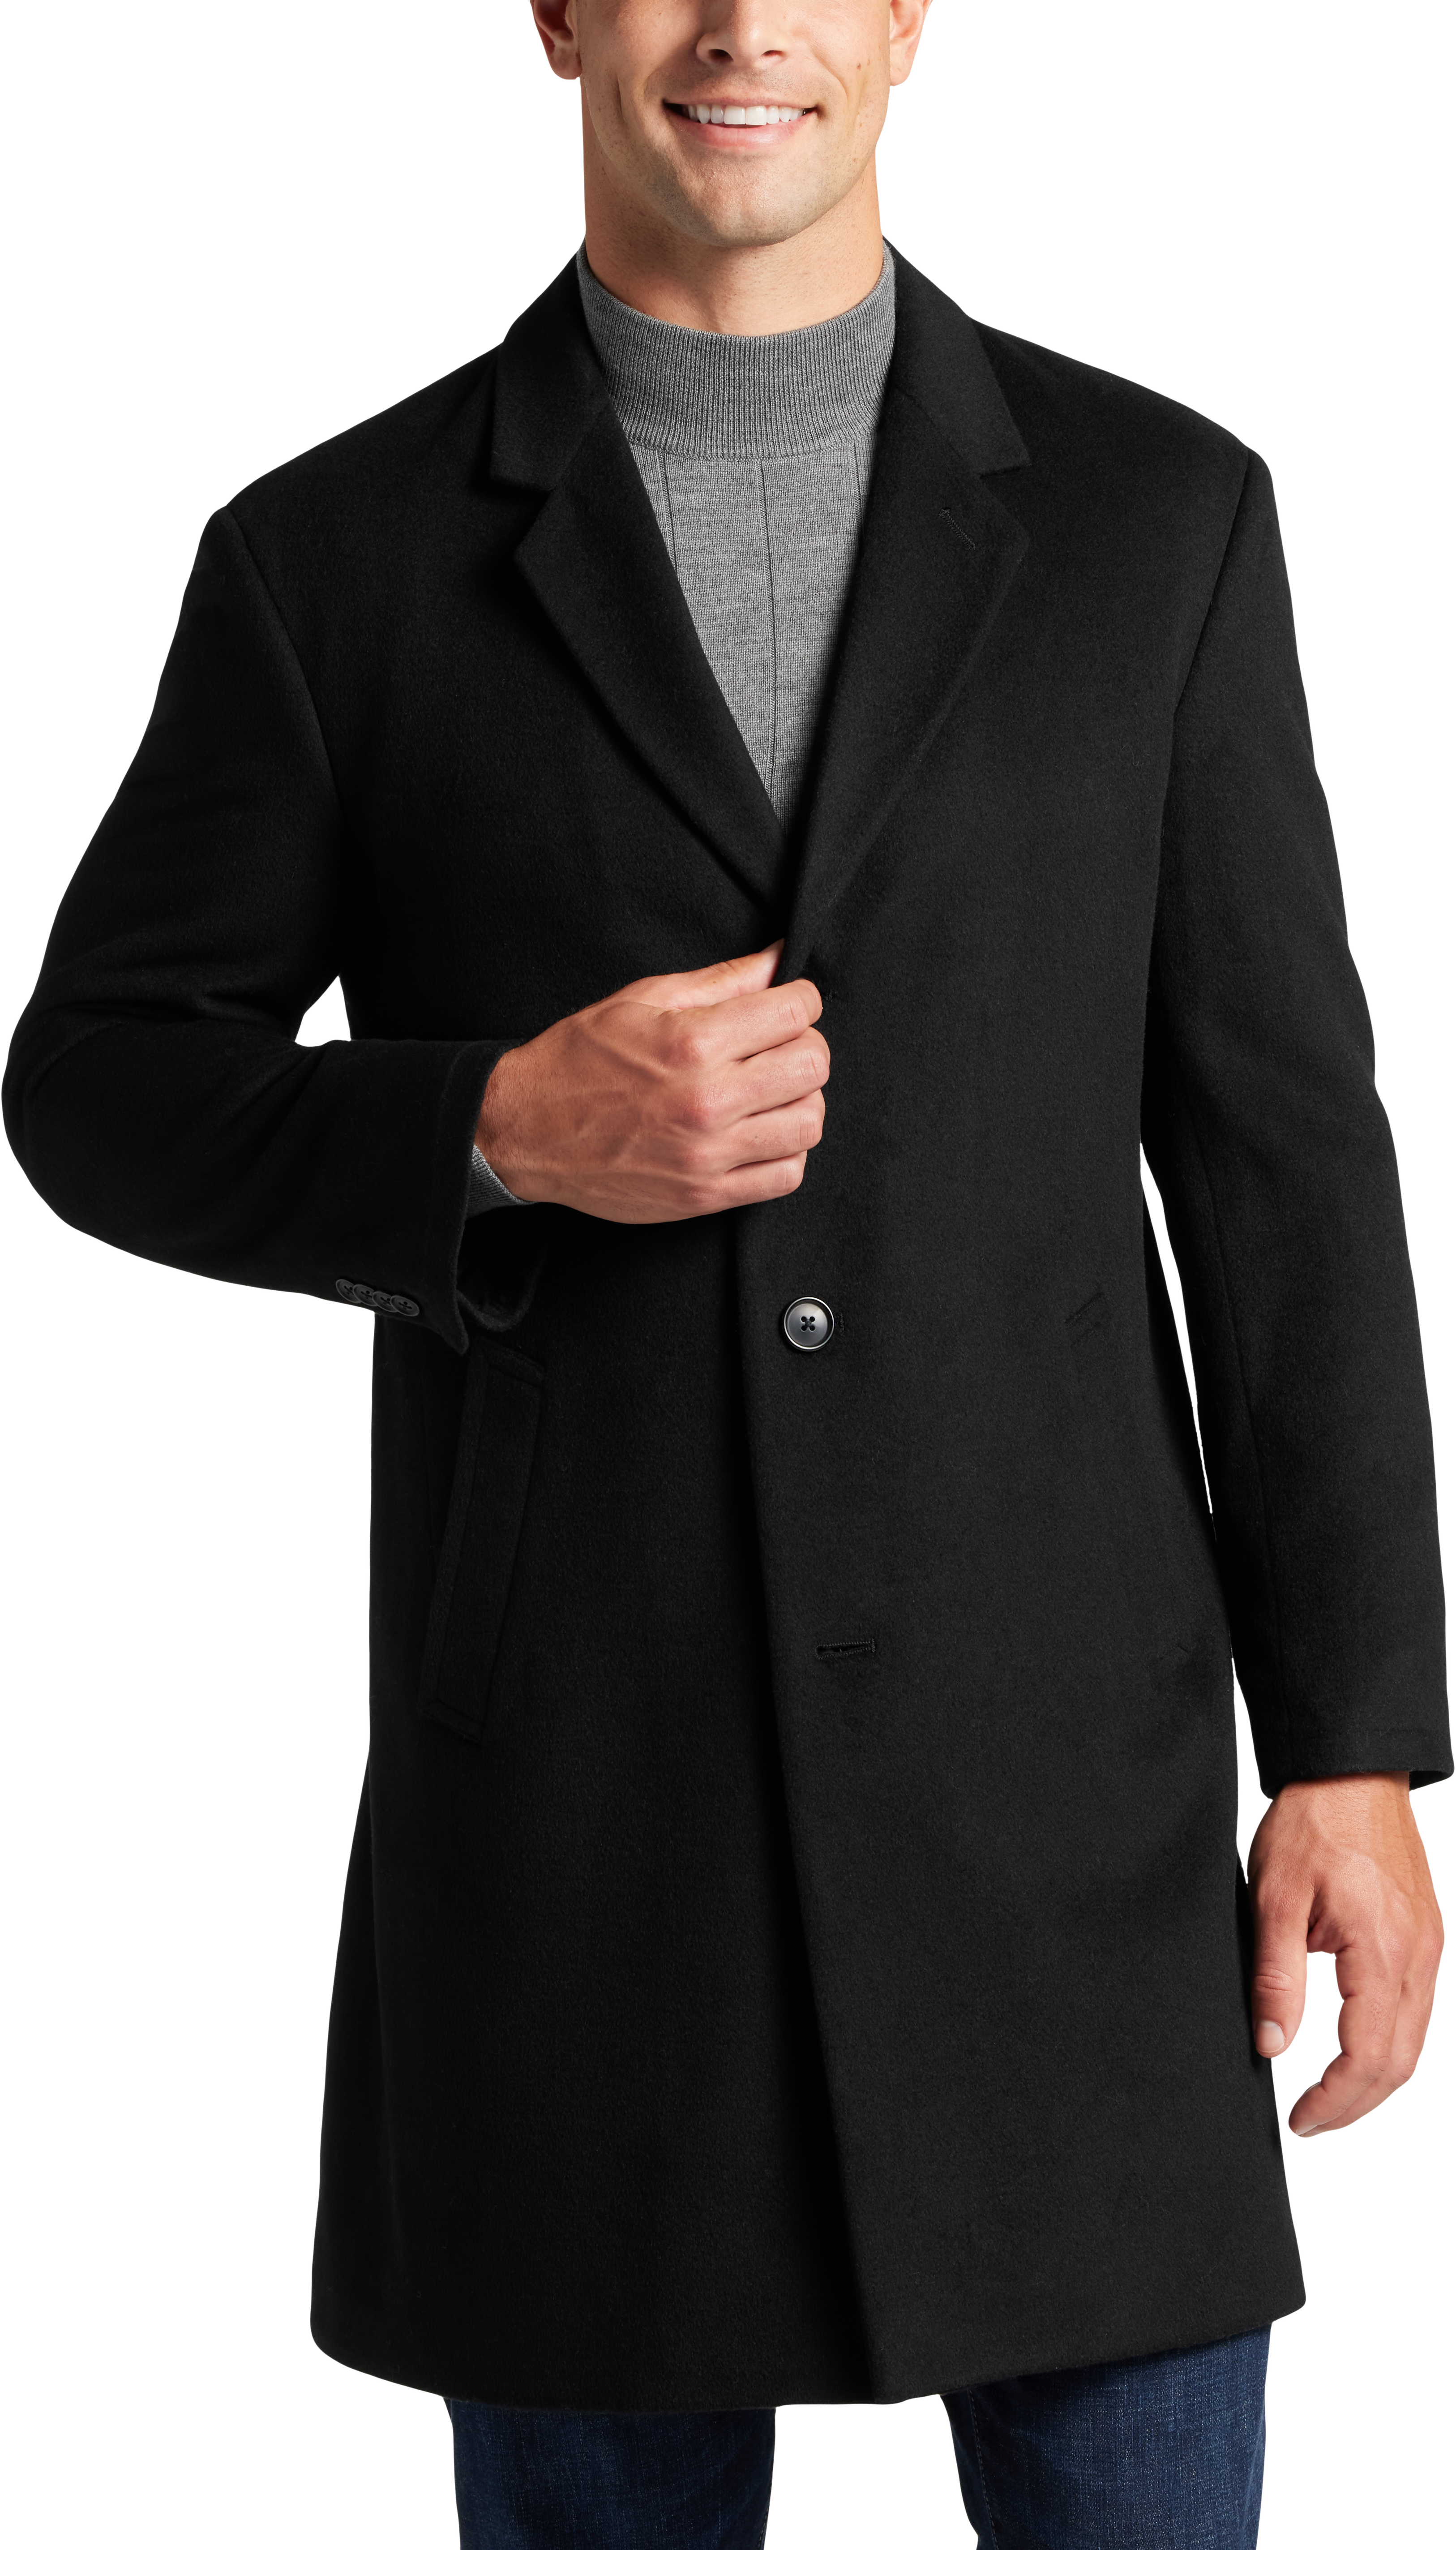 Staying Warm and Looking Handsome in a Topcoat – George Hahn